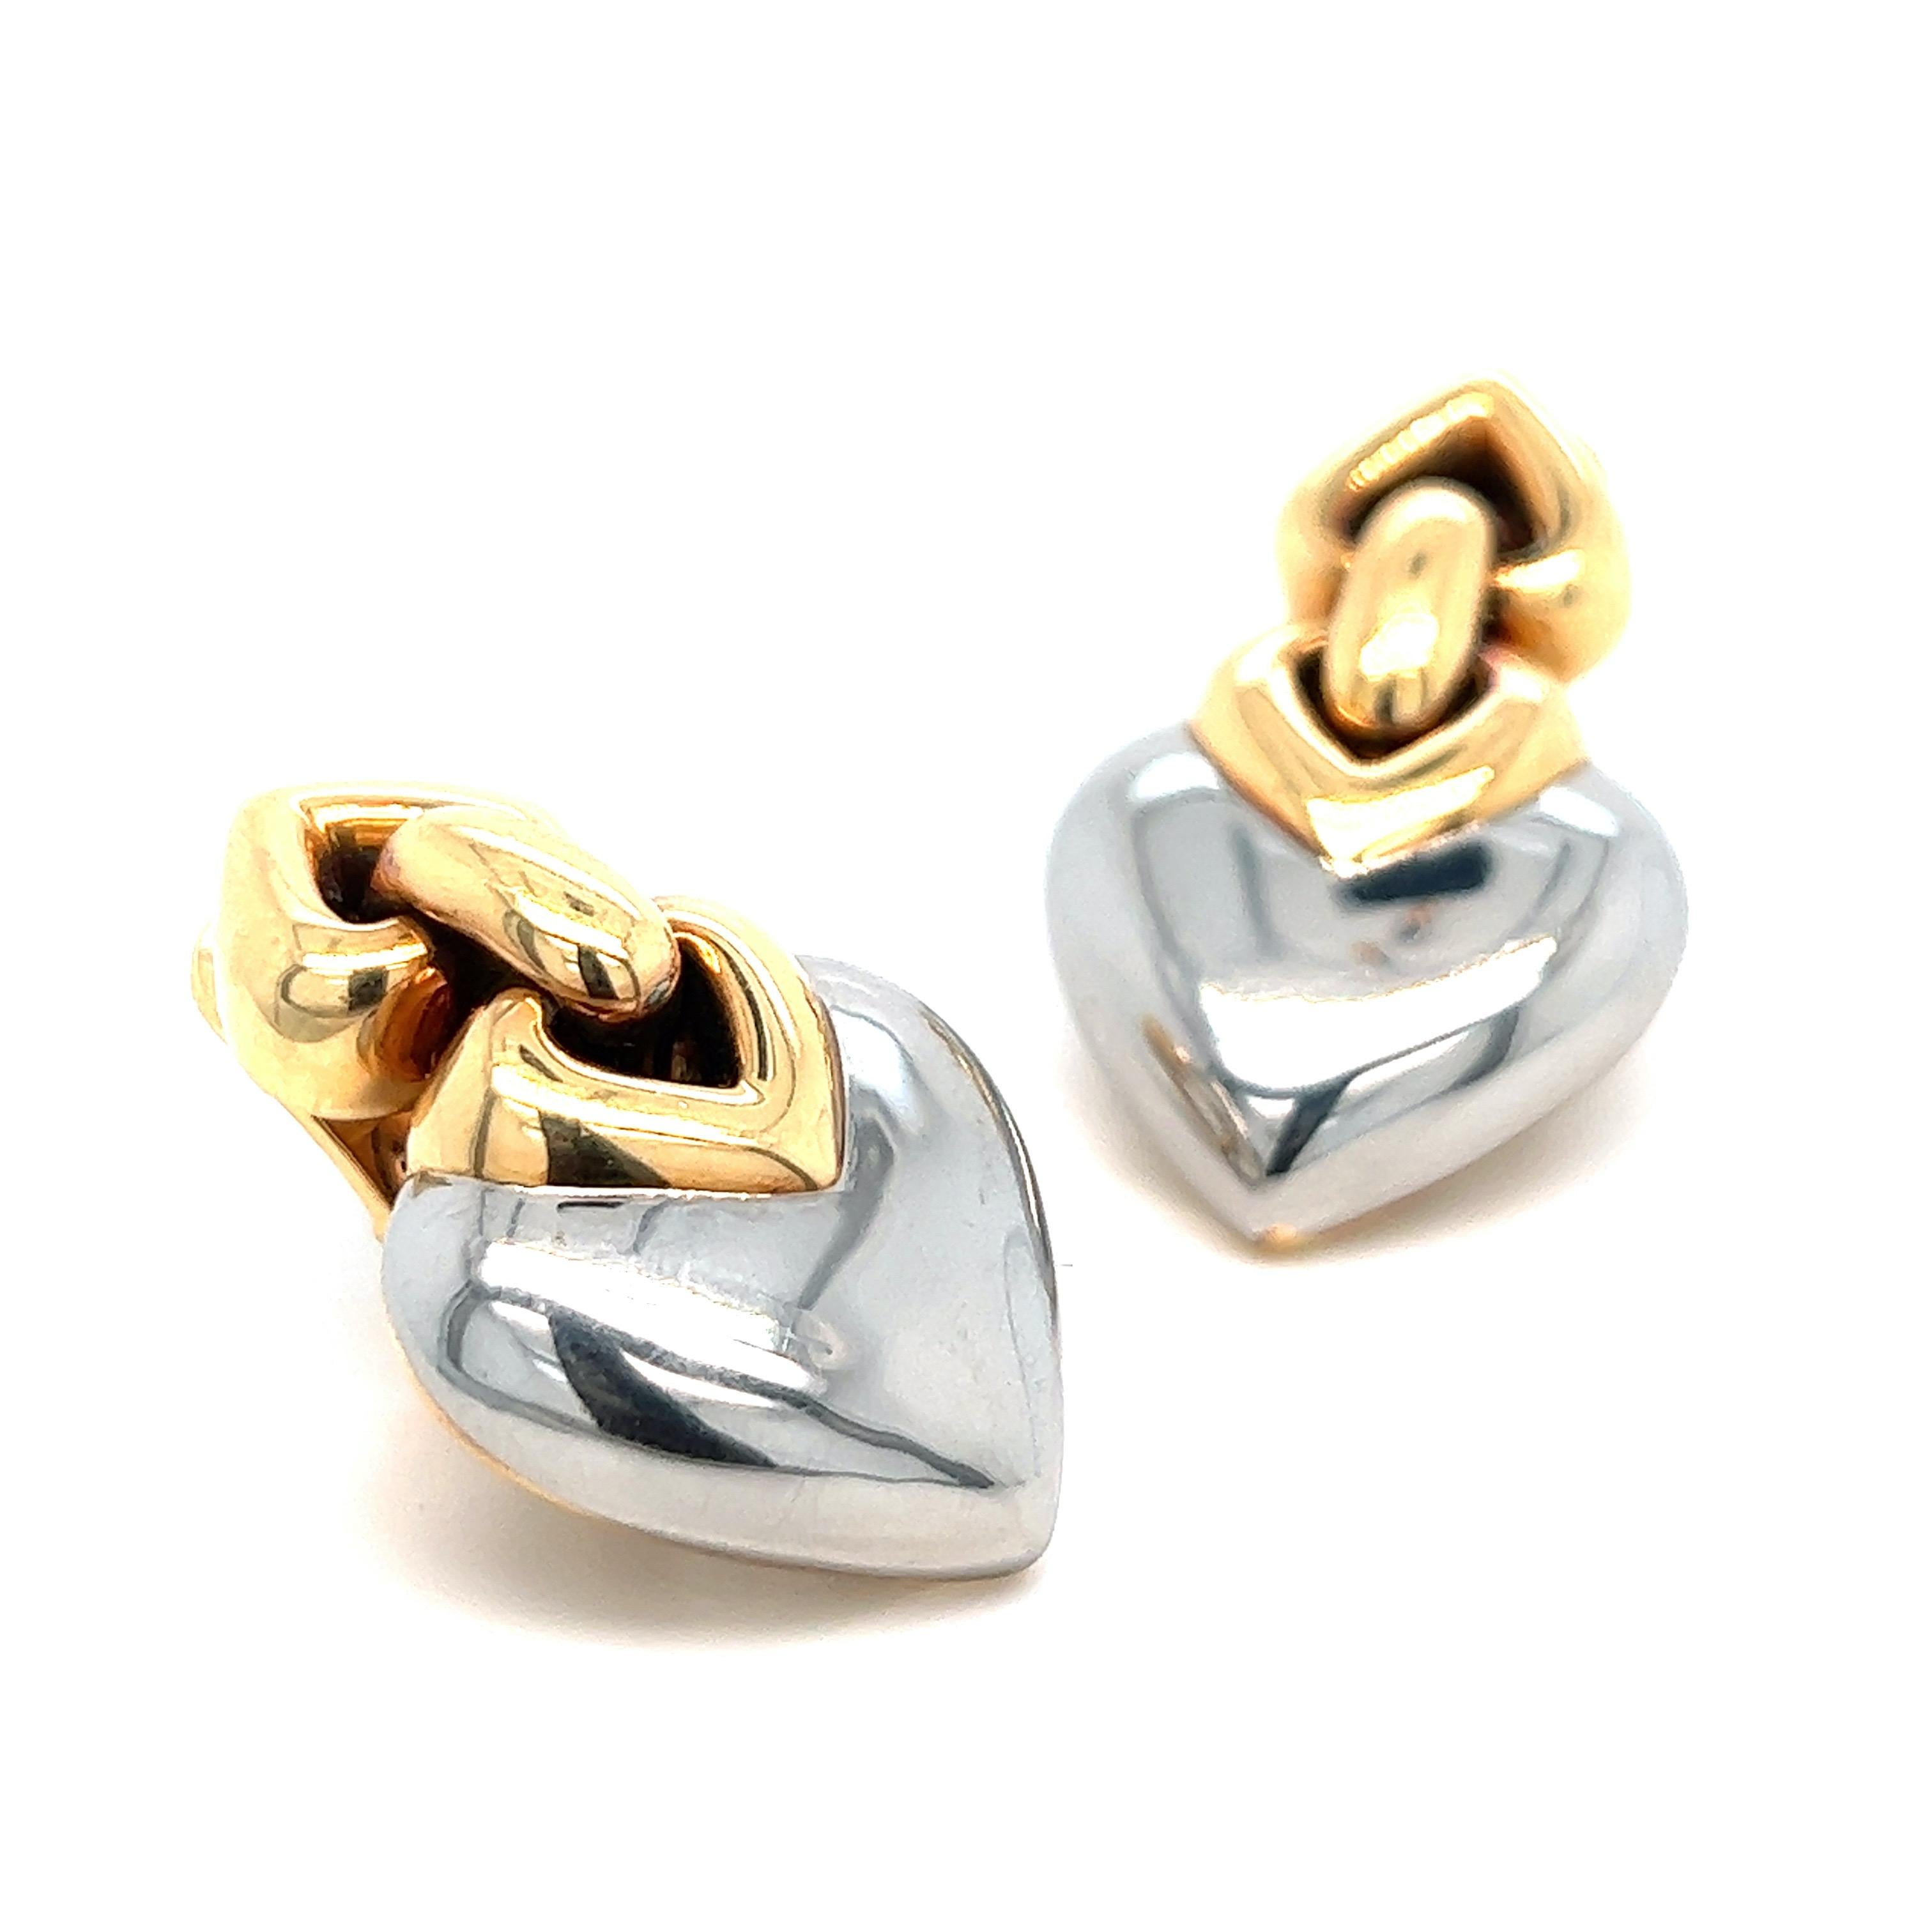 Bvlgari Doppio Cuore Gold Ear Clips In Excellent Condition For Sale In New York, NY